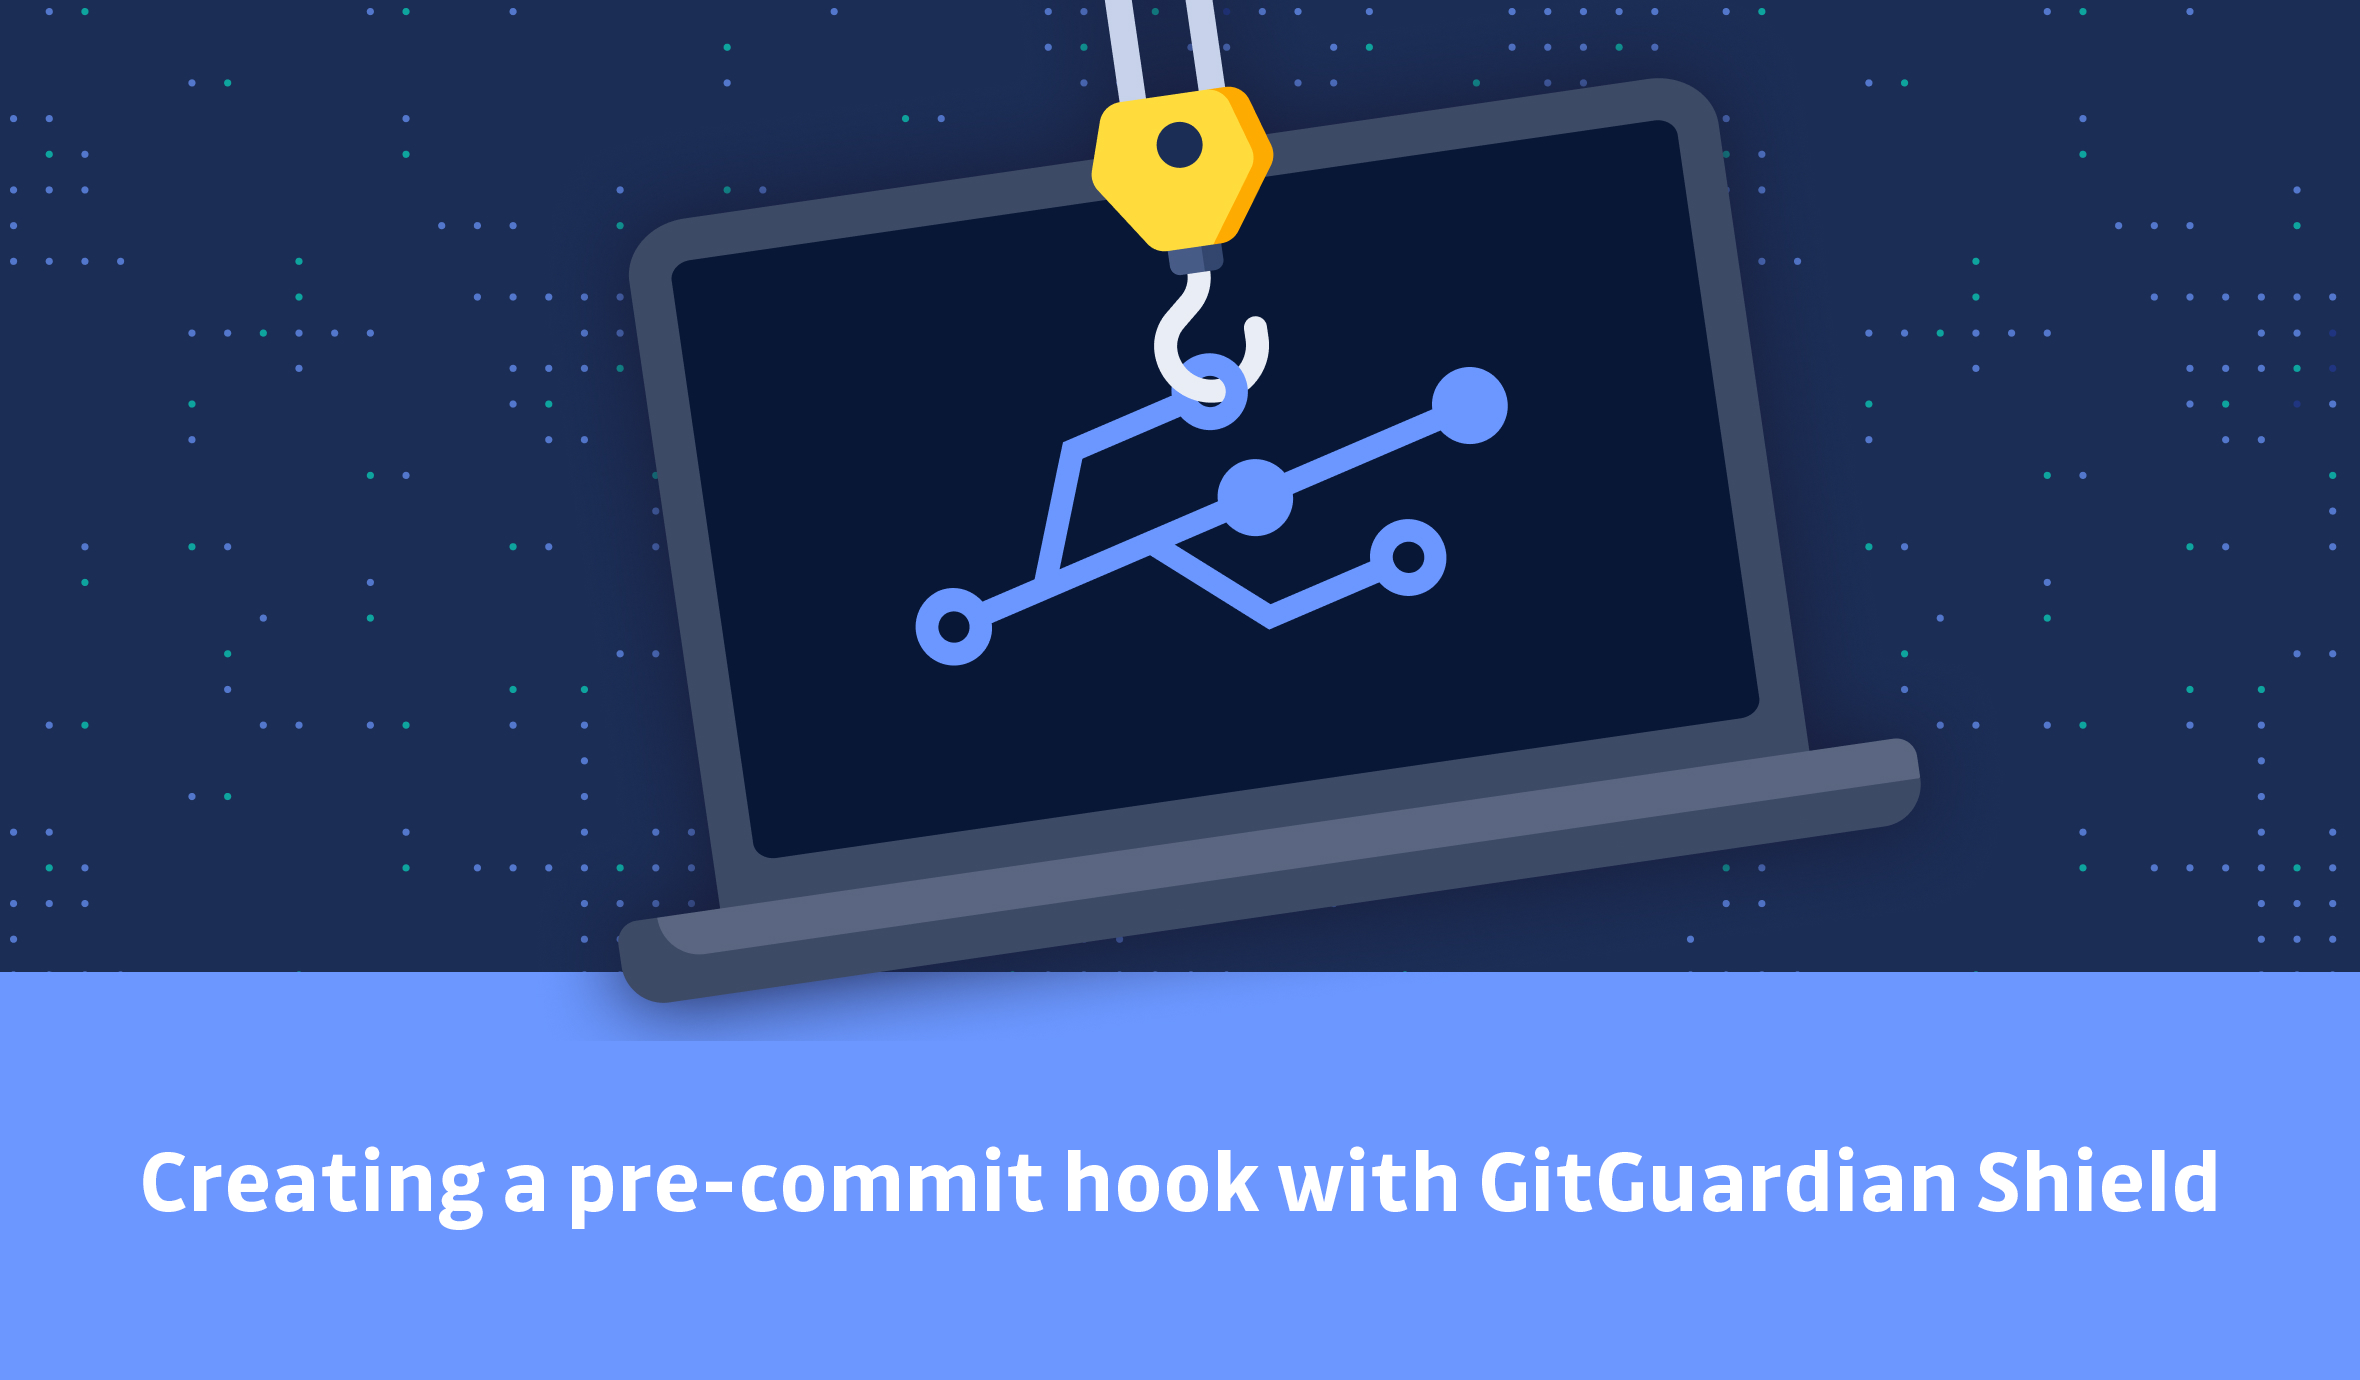 Setting up a pre-commit git hook with ggshield, the GitGuardian CLI.